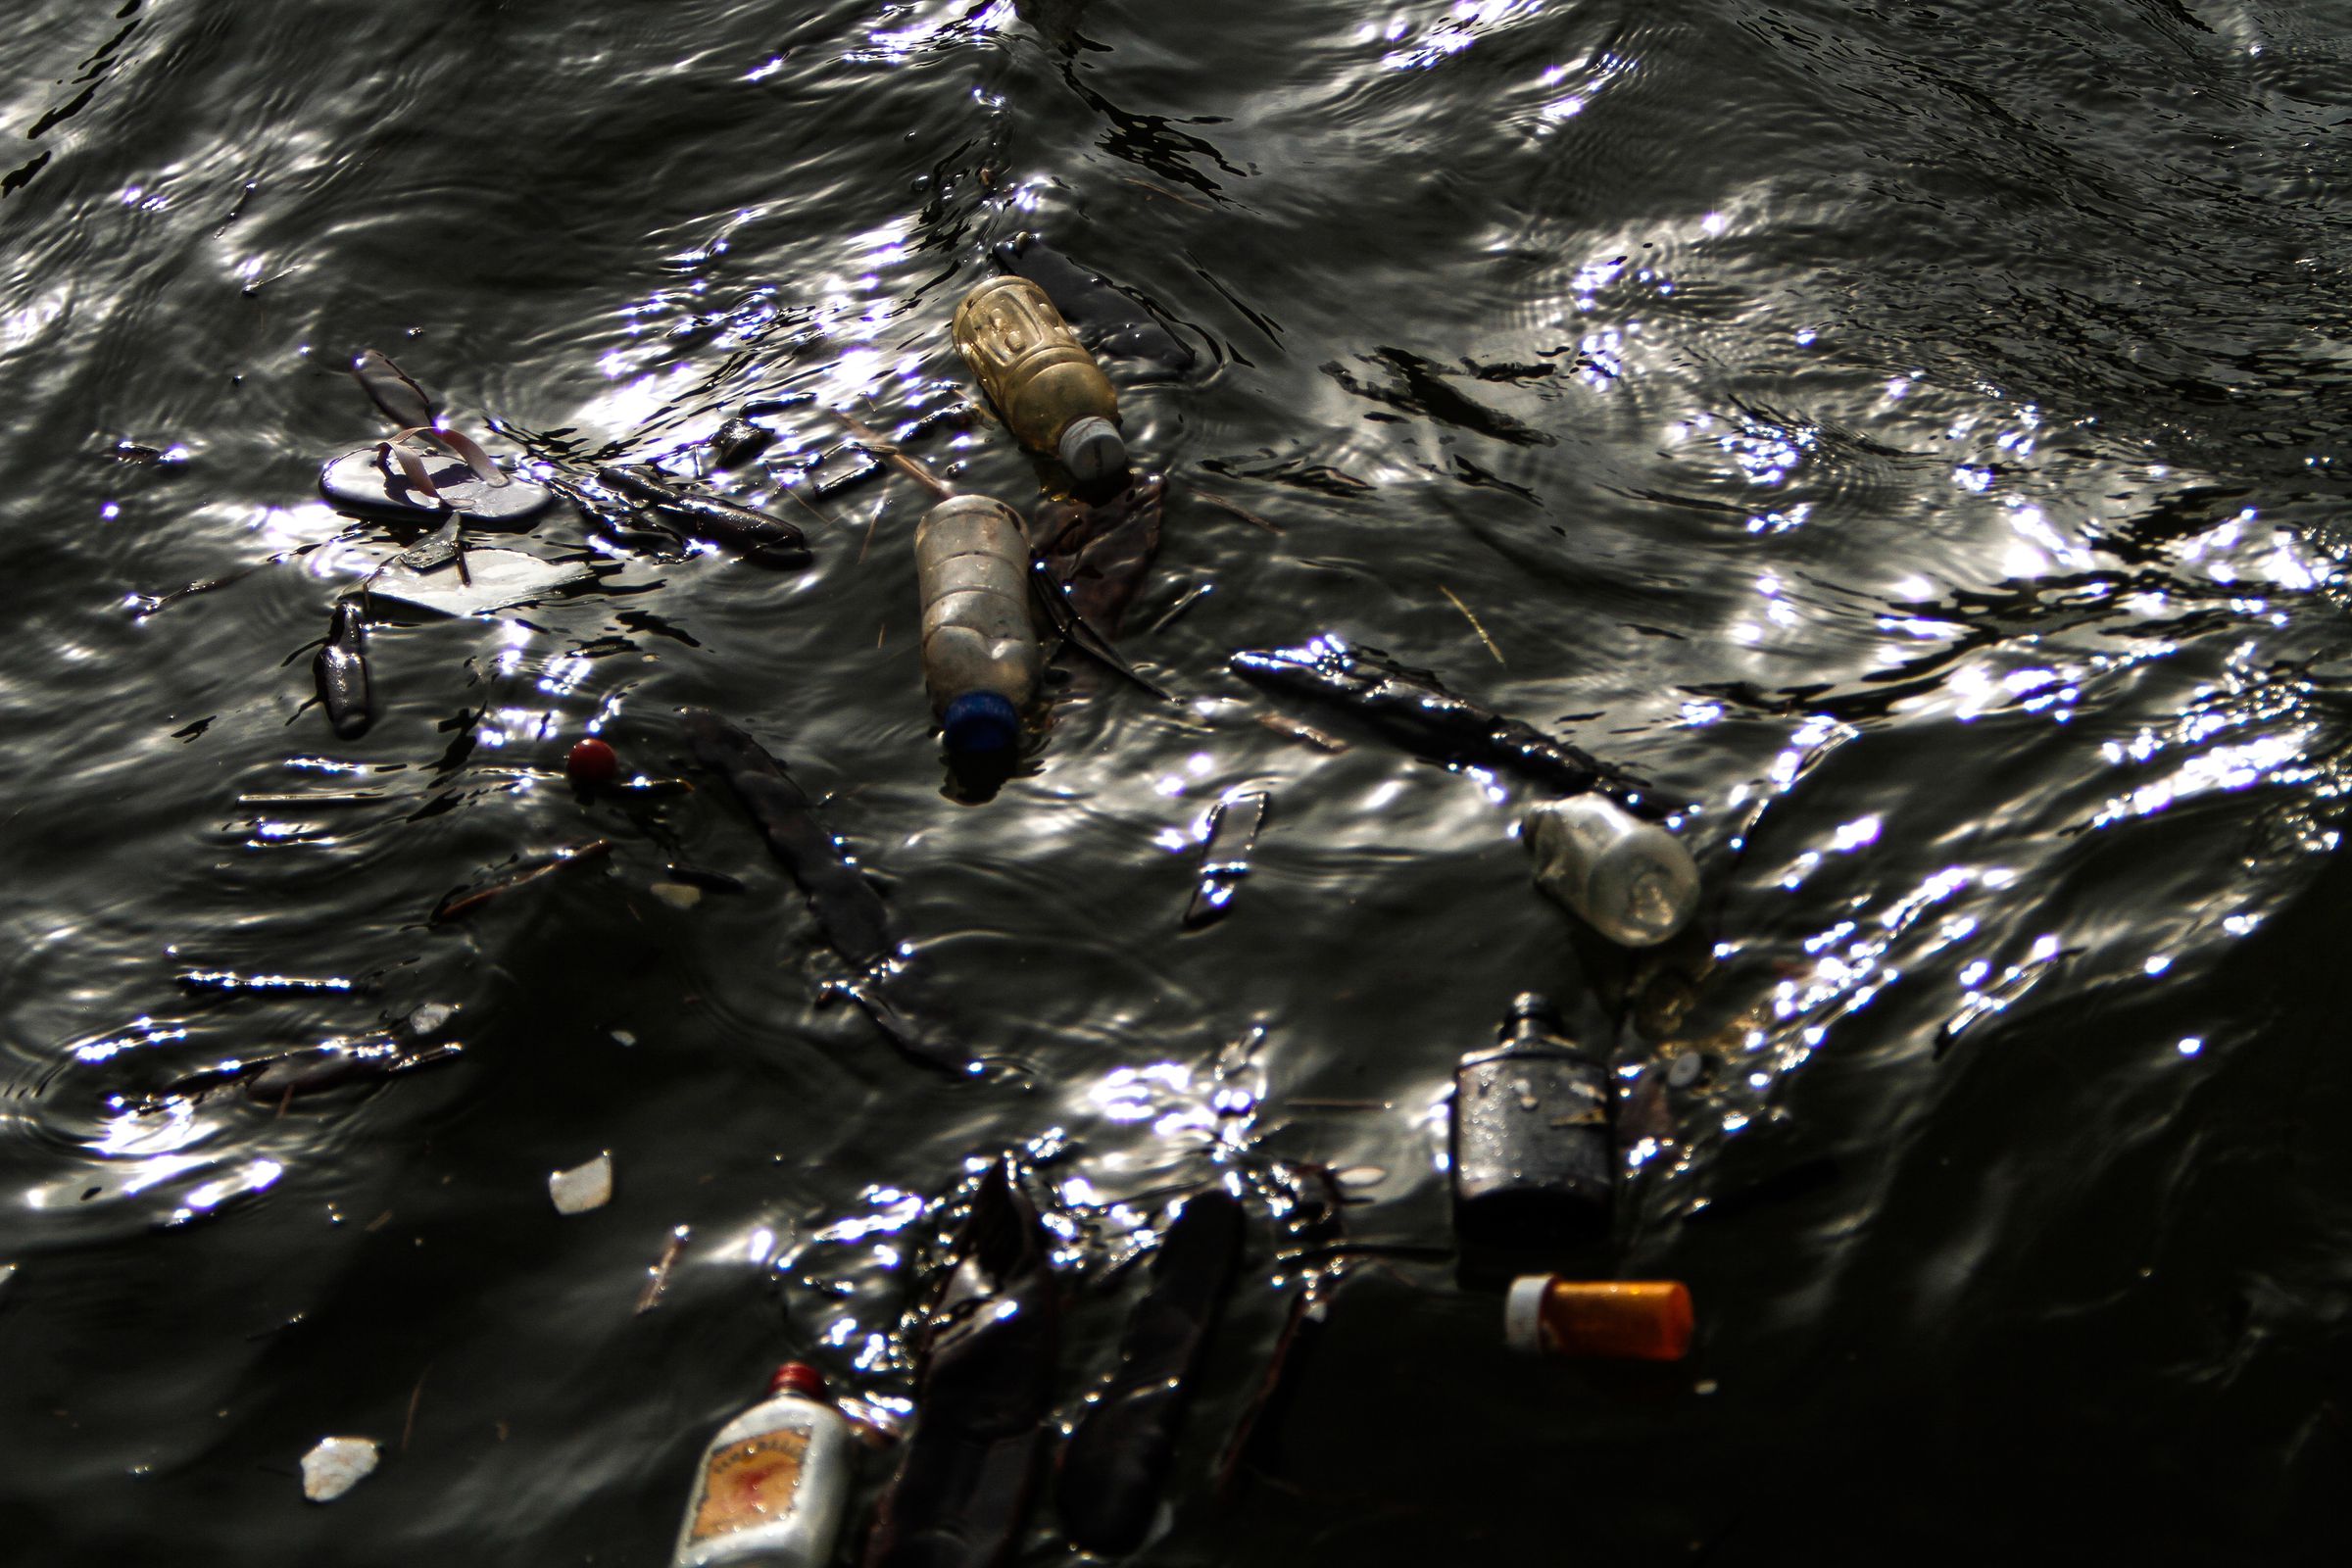 Garbage floats in the Flint River